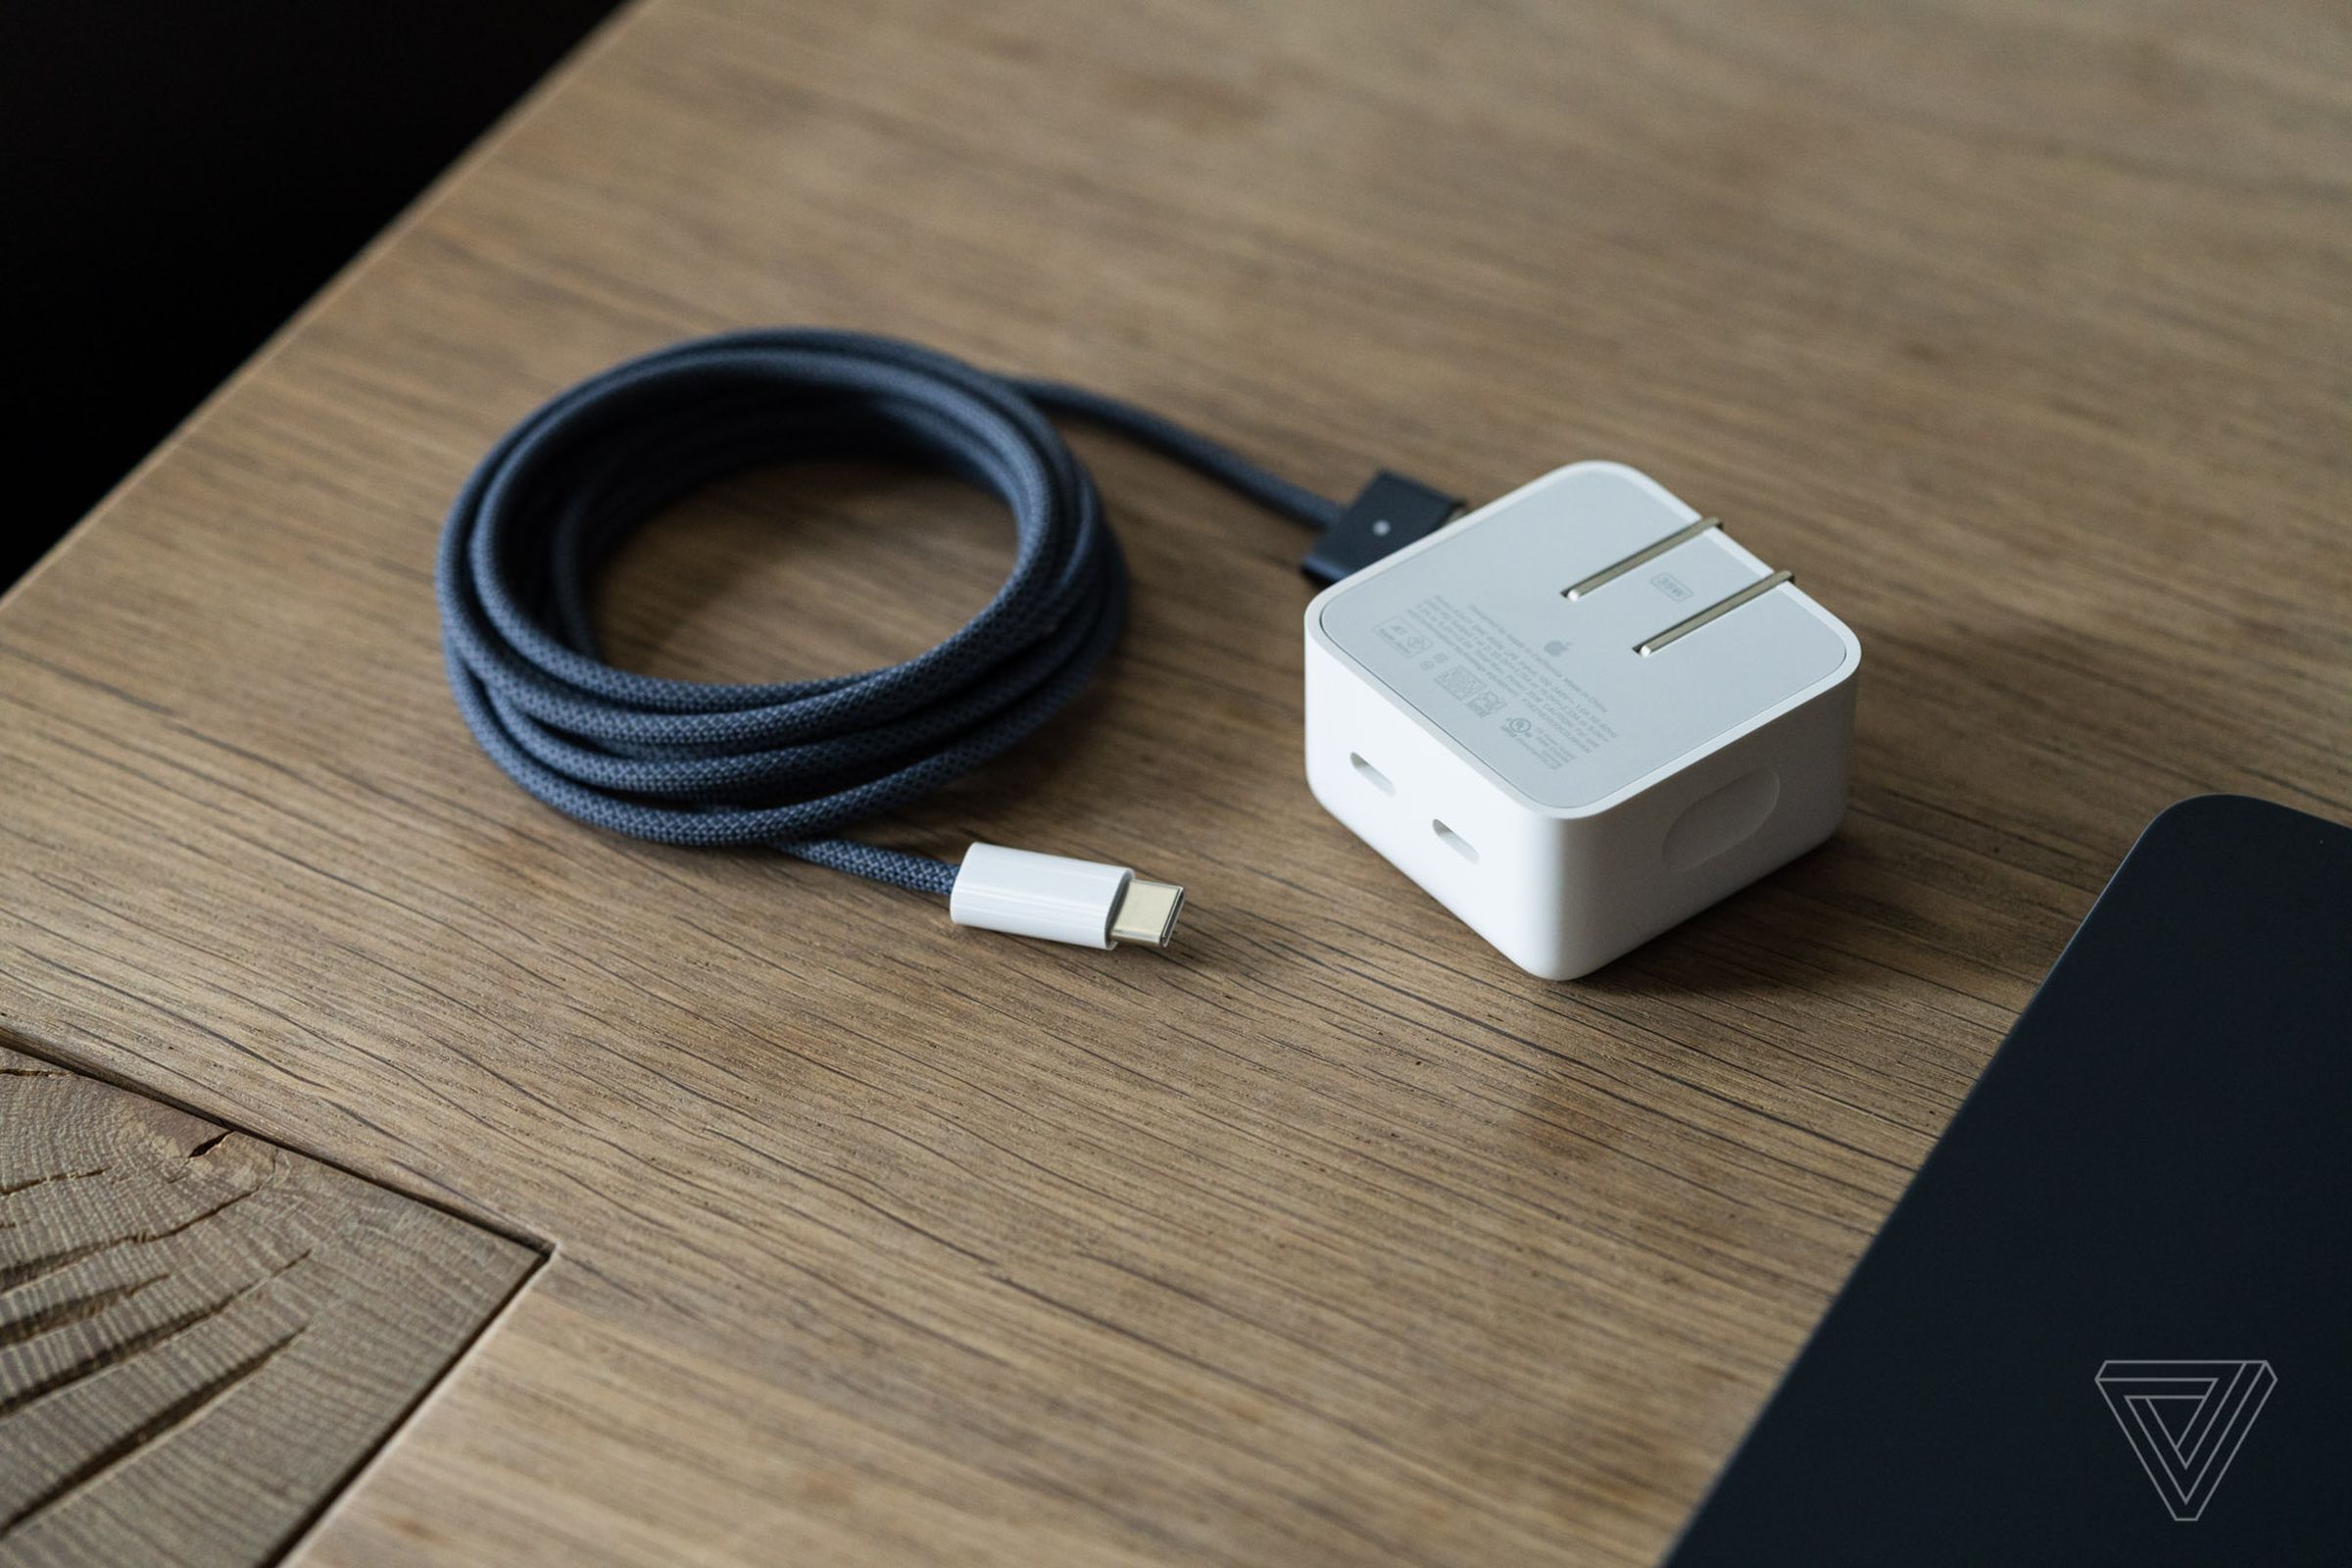 You have a choice between a smaller, slower 2-port charger or a larger, faster one-port charger on the upgraded Air models. Both come with a color-matched MagSafe cable.